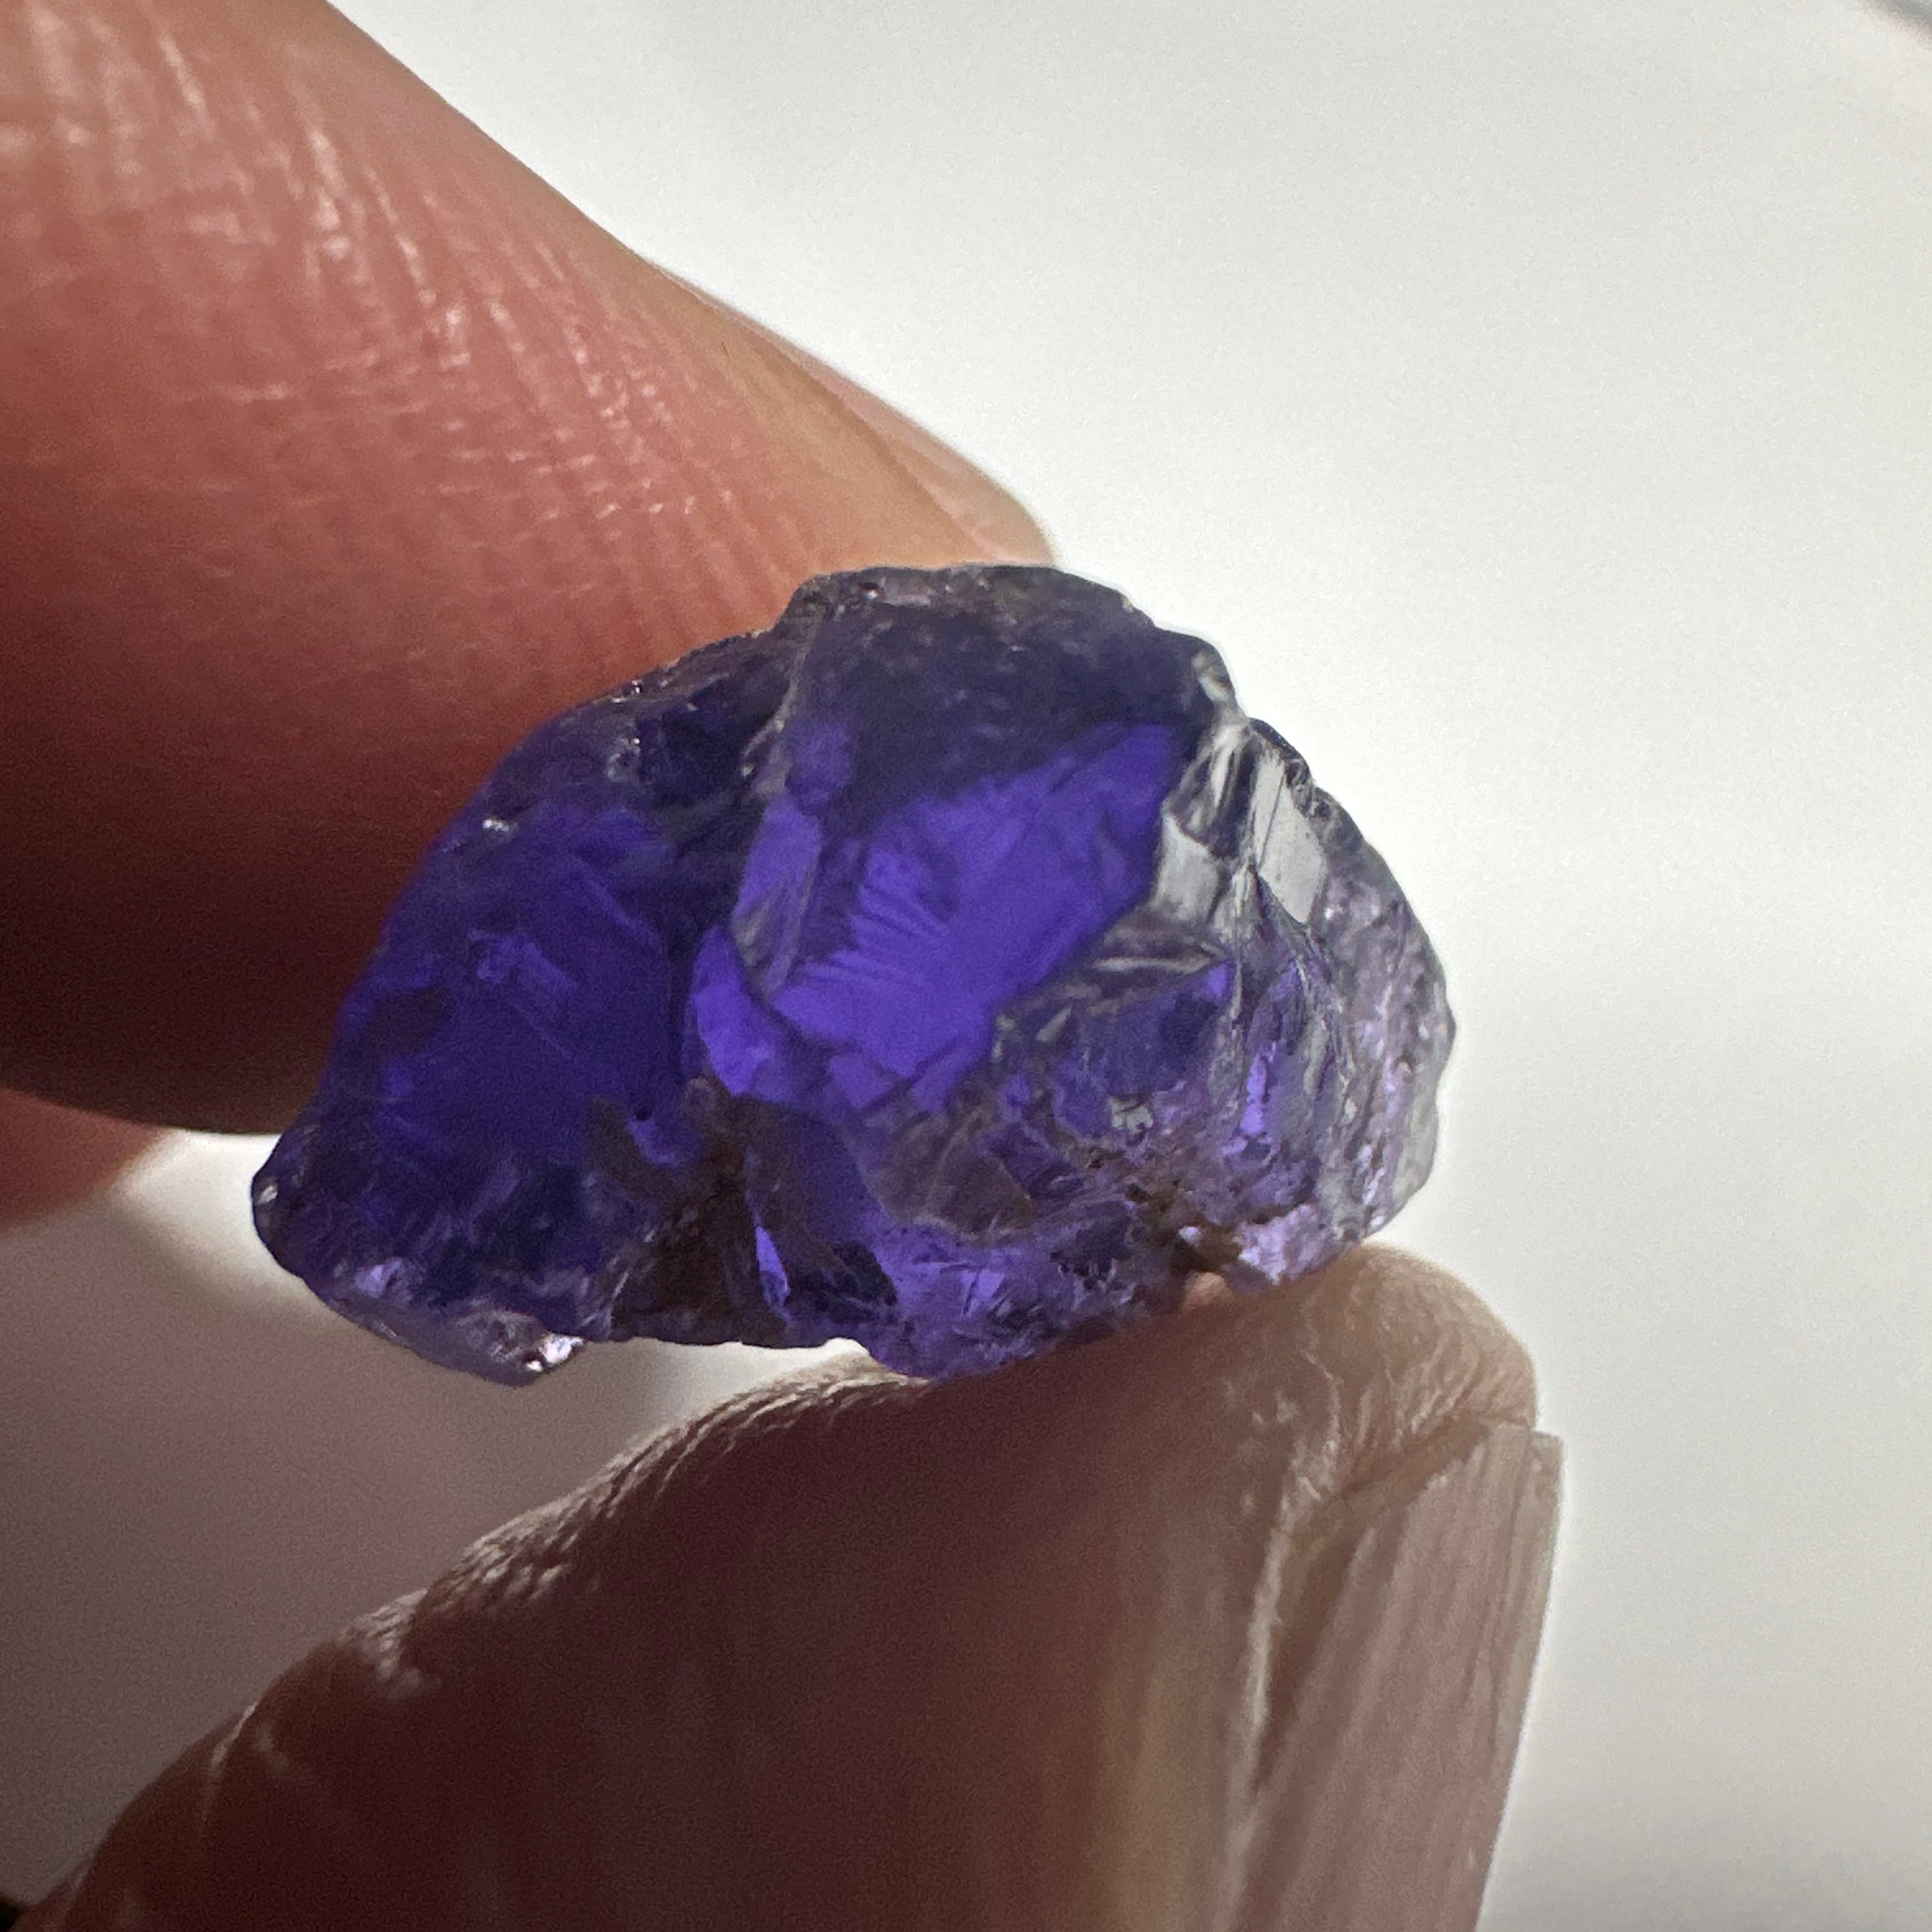 8.08ct Purple Scapolite Crystal, Tanzania, Untreated Untreated, VVS-IF clean